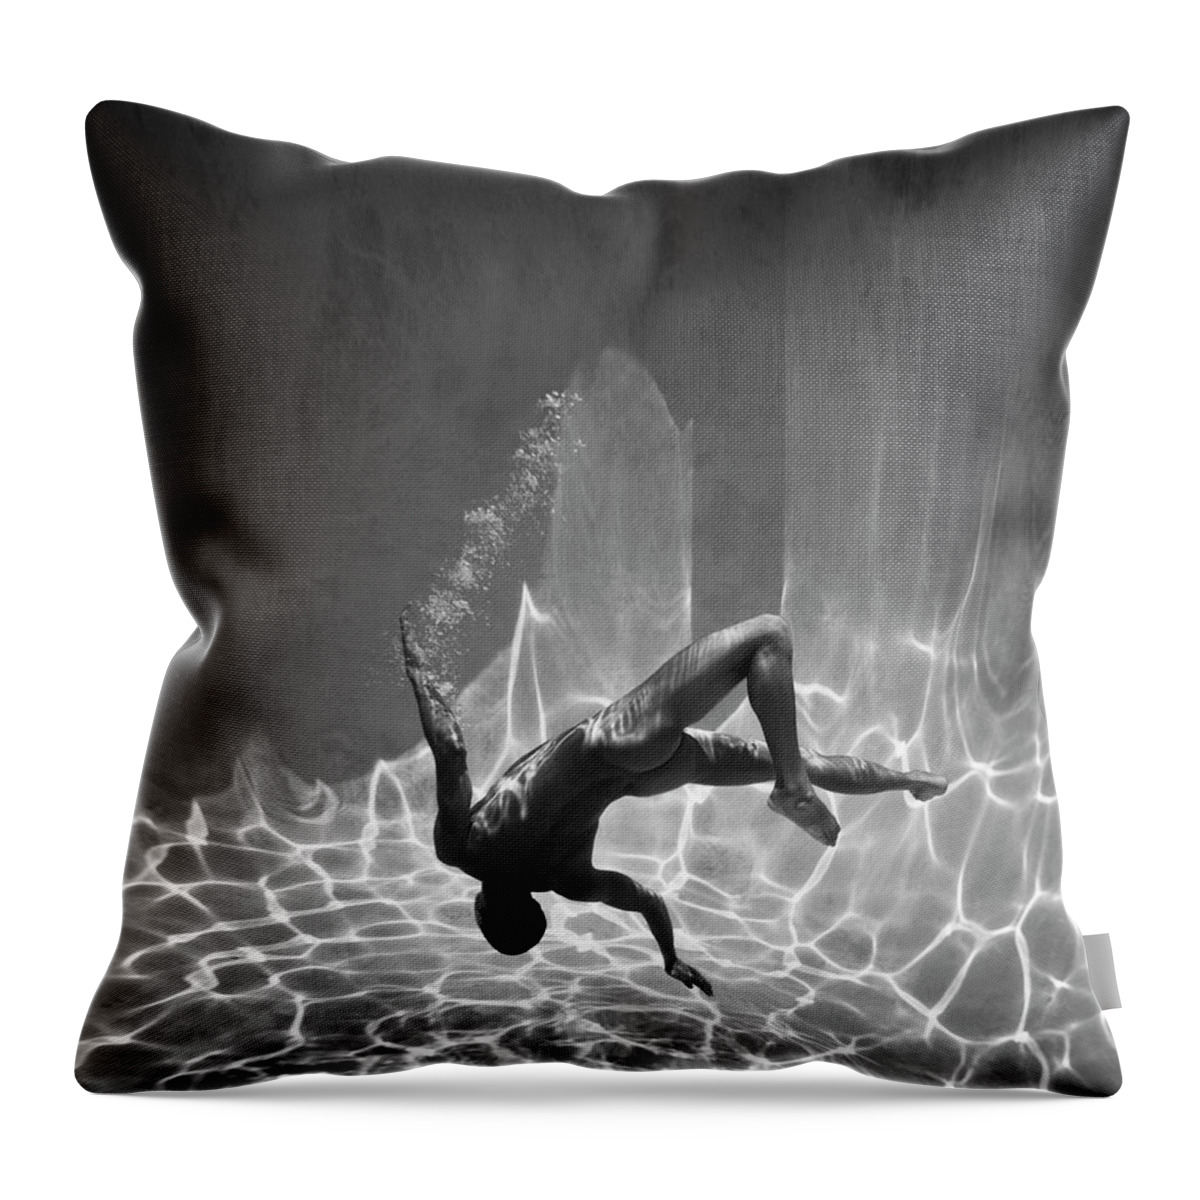 Underwater Throw Pillow featuring the photograph Naked Man Underwater by Ed Freeman